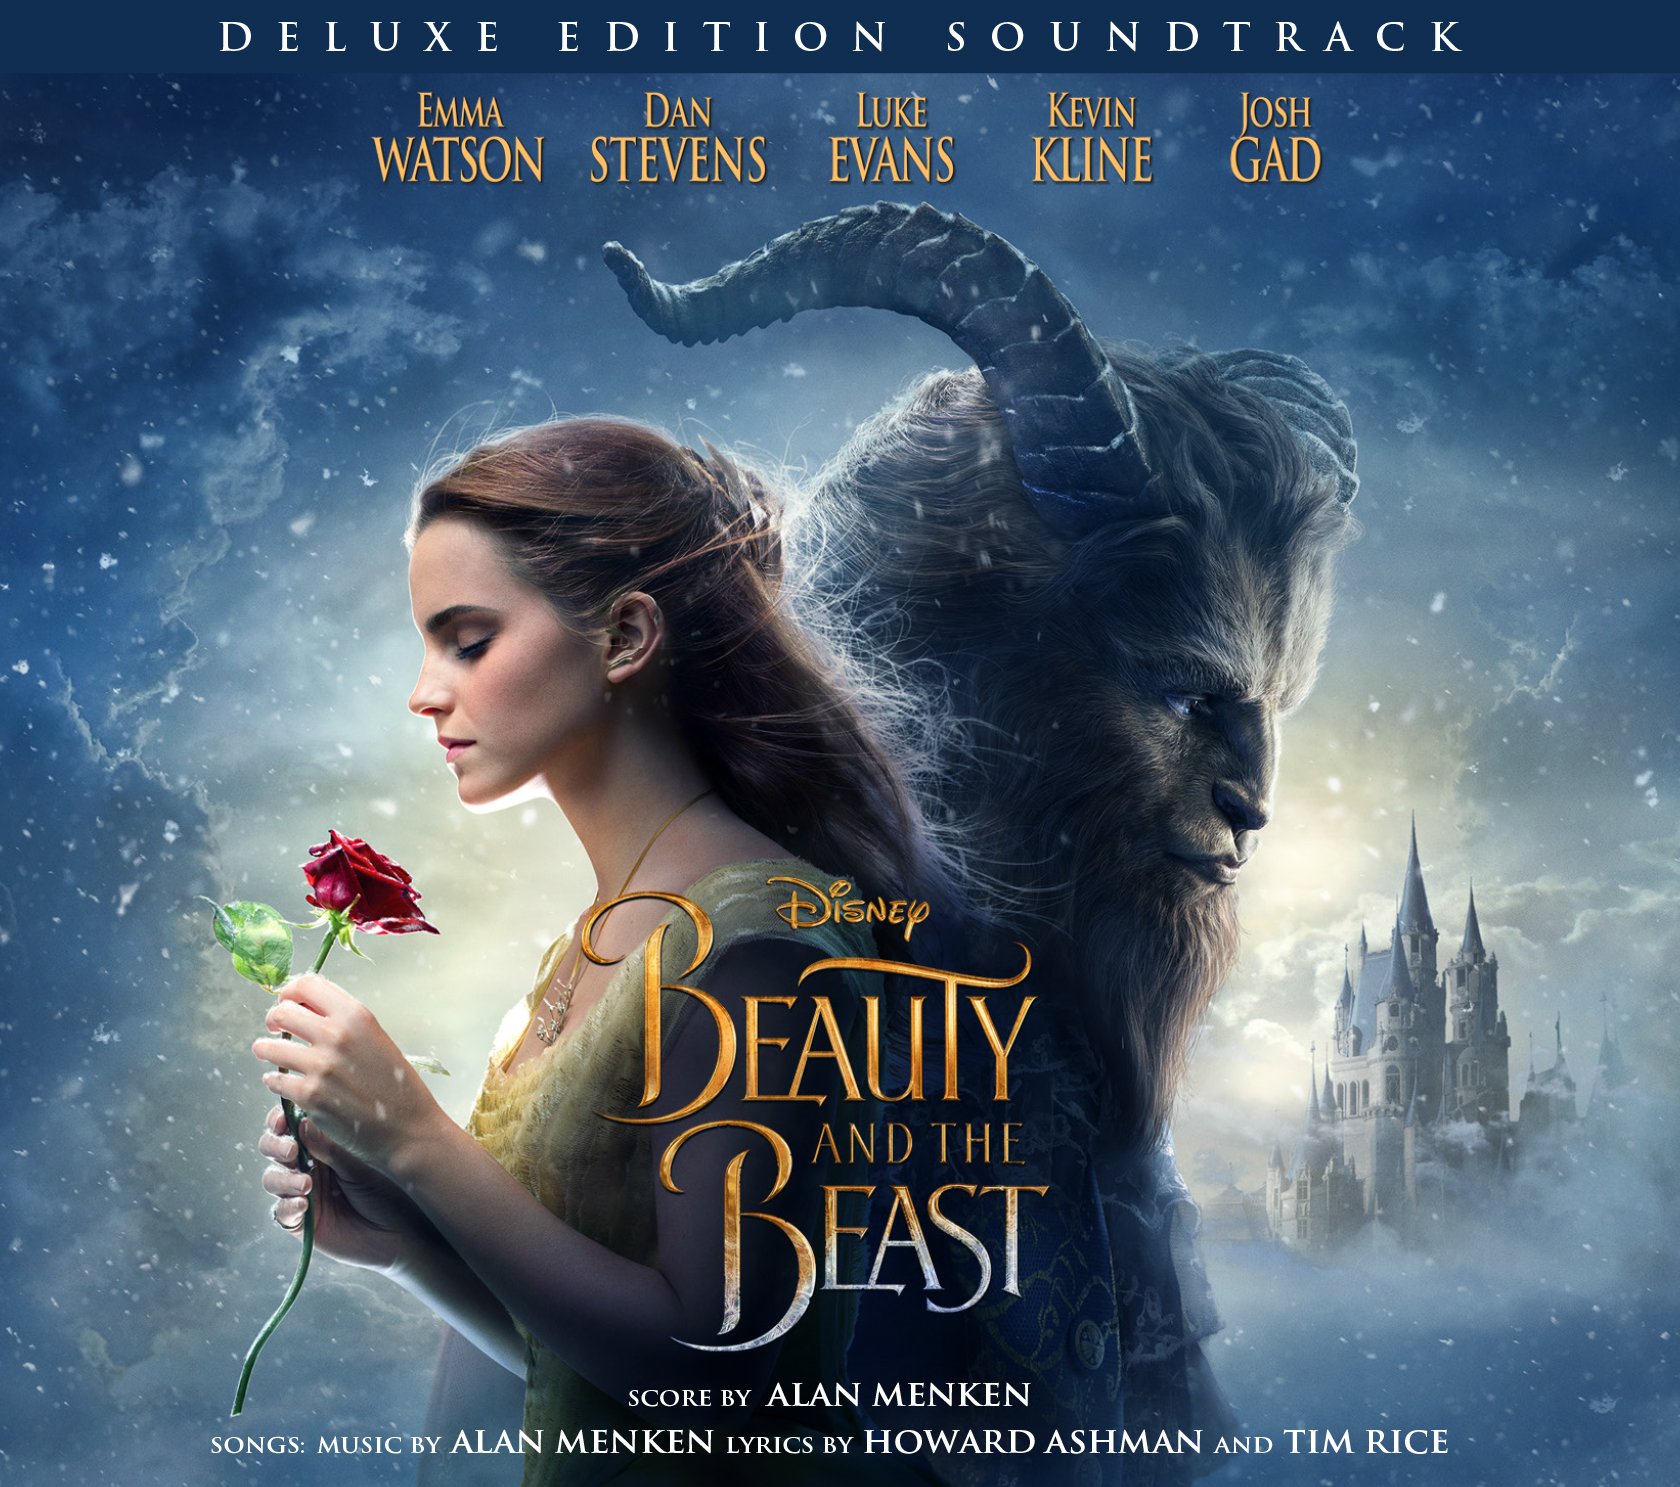 Soundtrack art for "Beauty and the Beast"